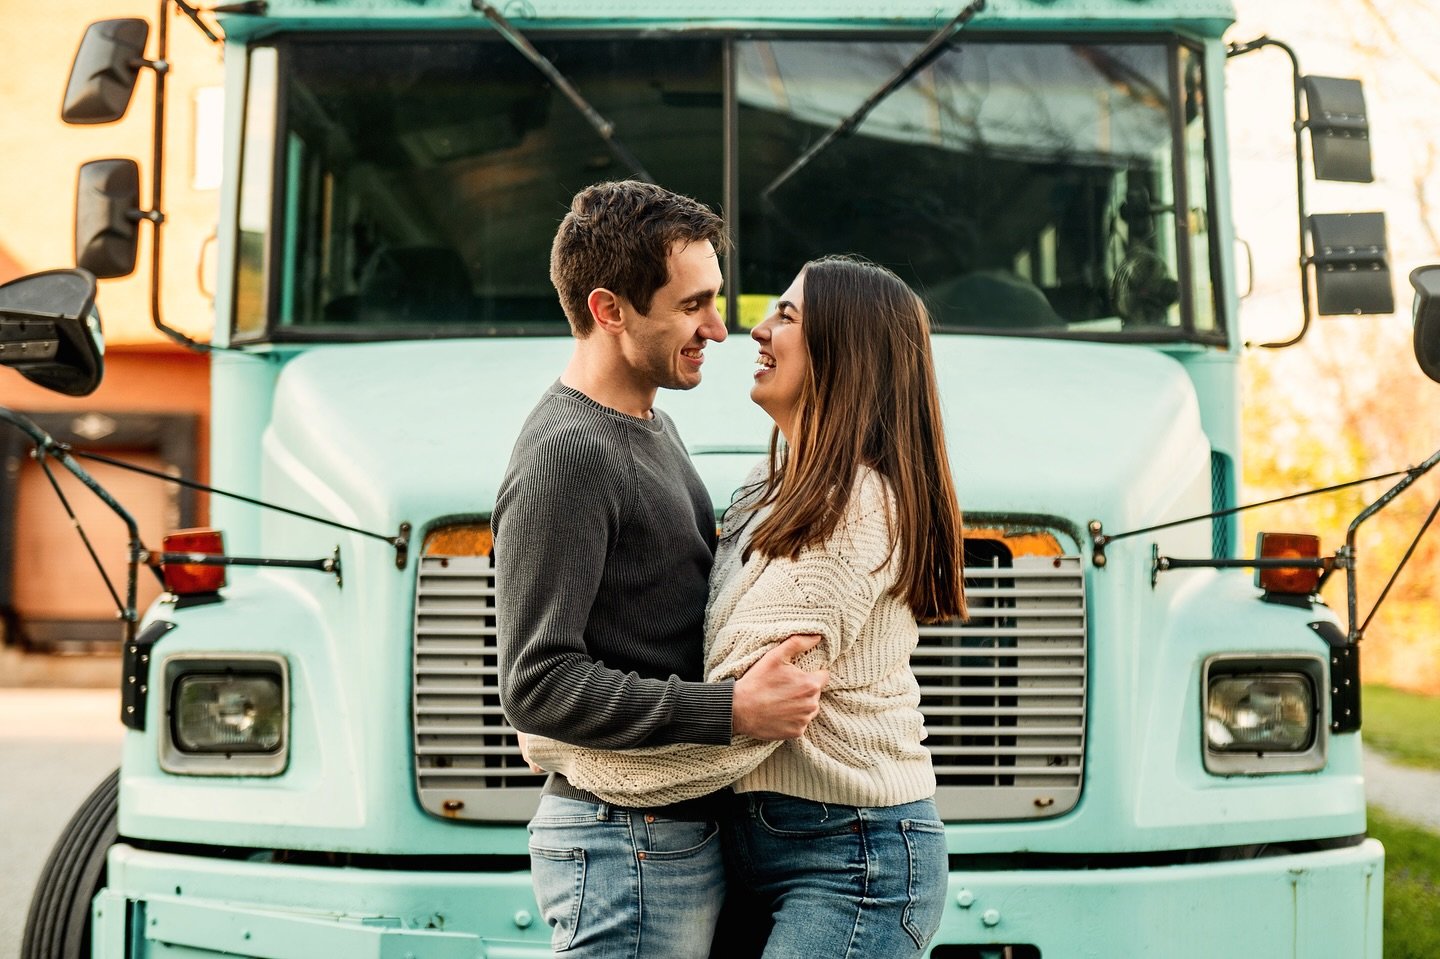 When the clouds part, the sky is blue and you stumble upon a big turquoise school bus&hellip;magic. 💫

#engaged #engagedpittsburgh #engagement #pittsburgh #pittsburghengagement #pittsburghphotographer #pittsburghengagementphotographer #pittsburgheng